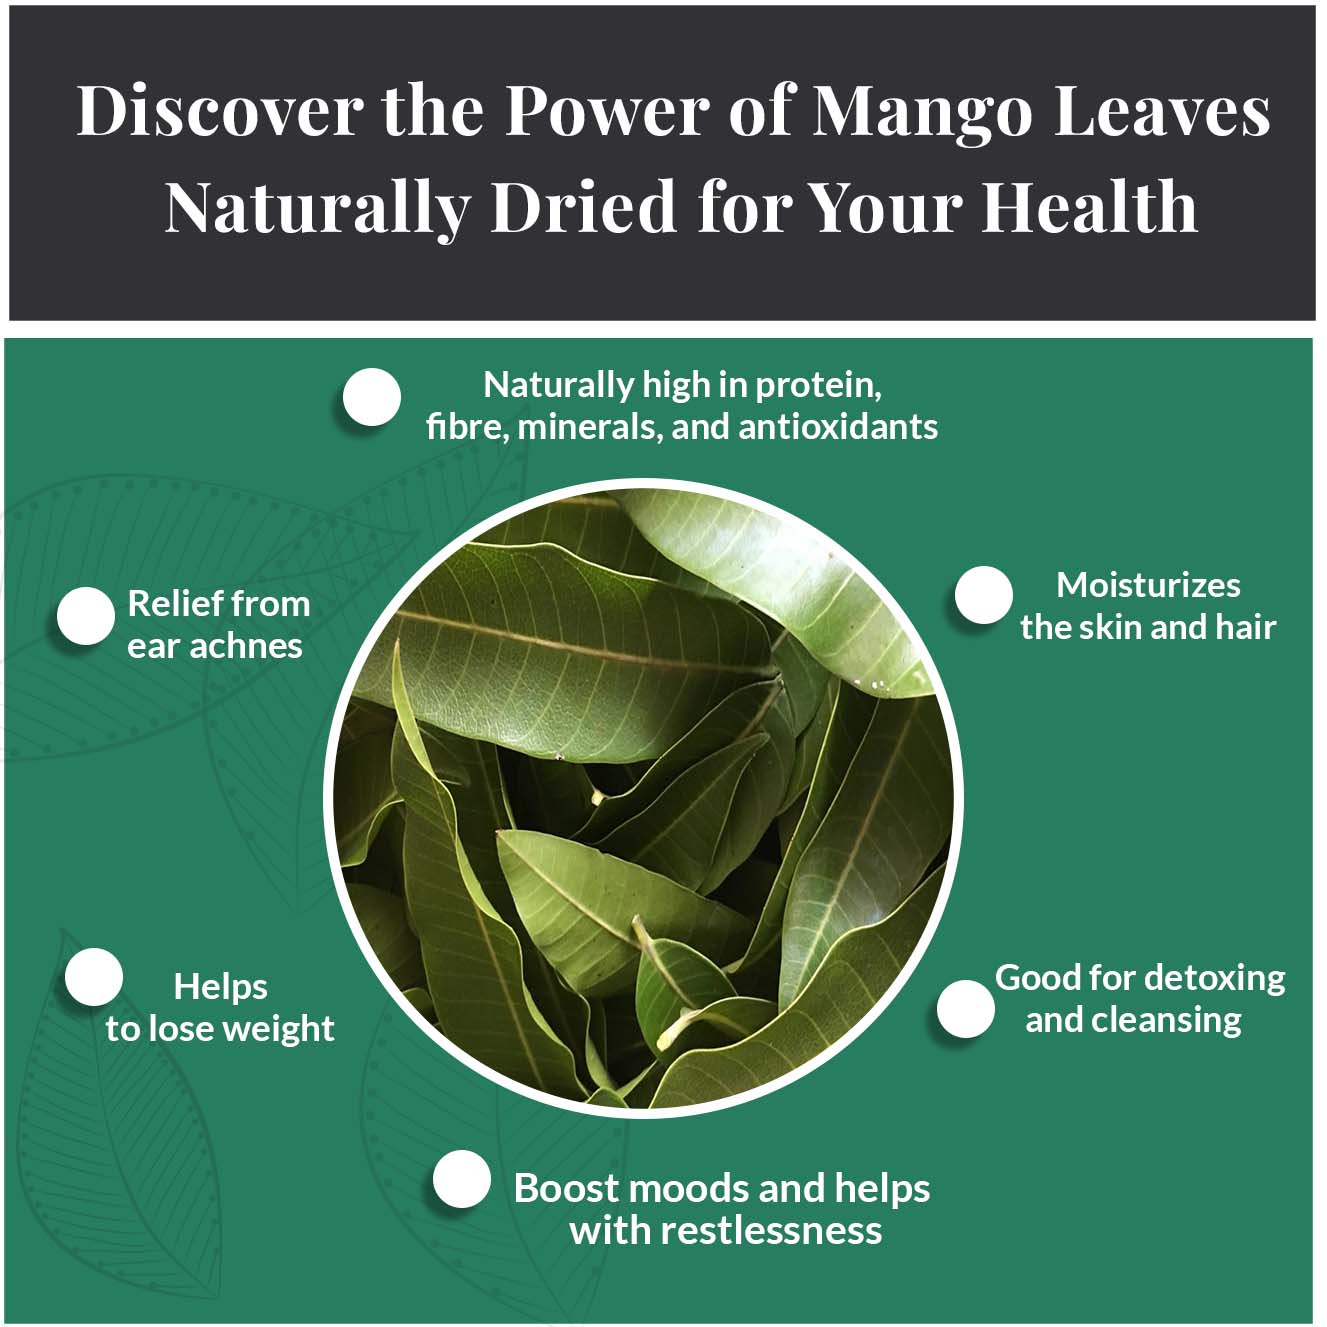 
                  
                    Discover the Power of Mango leaves tea Naturally dried for Your Health. - Naturally high in protein, fibre, minerals, and antixidants. - Moisturizes the skin and hair - Good for detoxing and cleansing - Boost moods and helps with restlessness - Helps to lose weight - Relief from ear achnes
                  
                